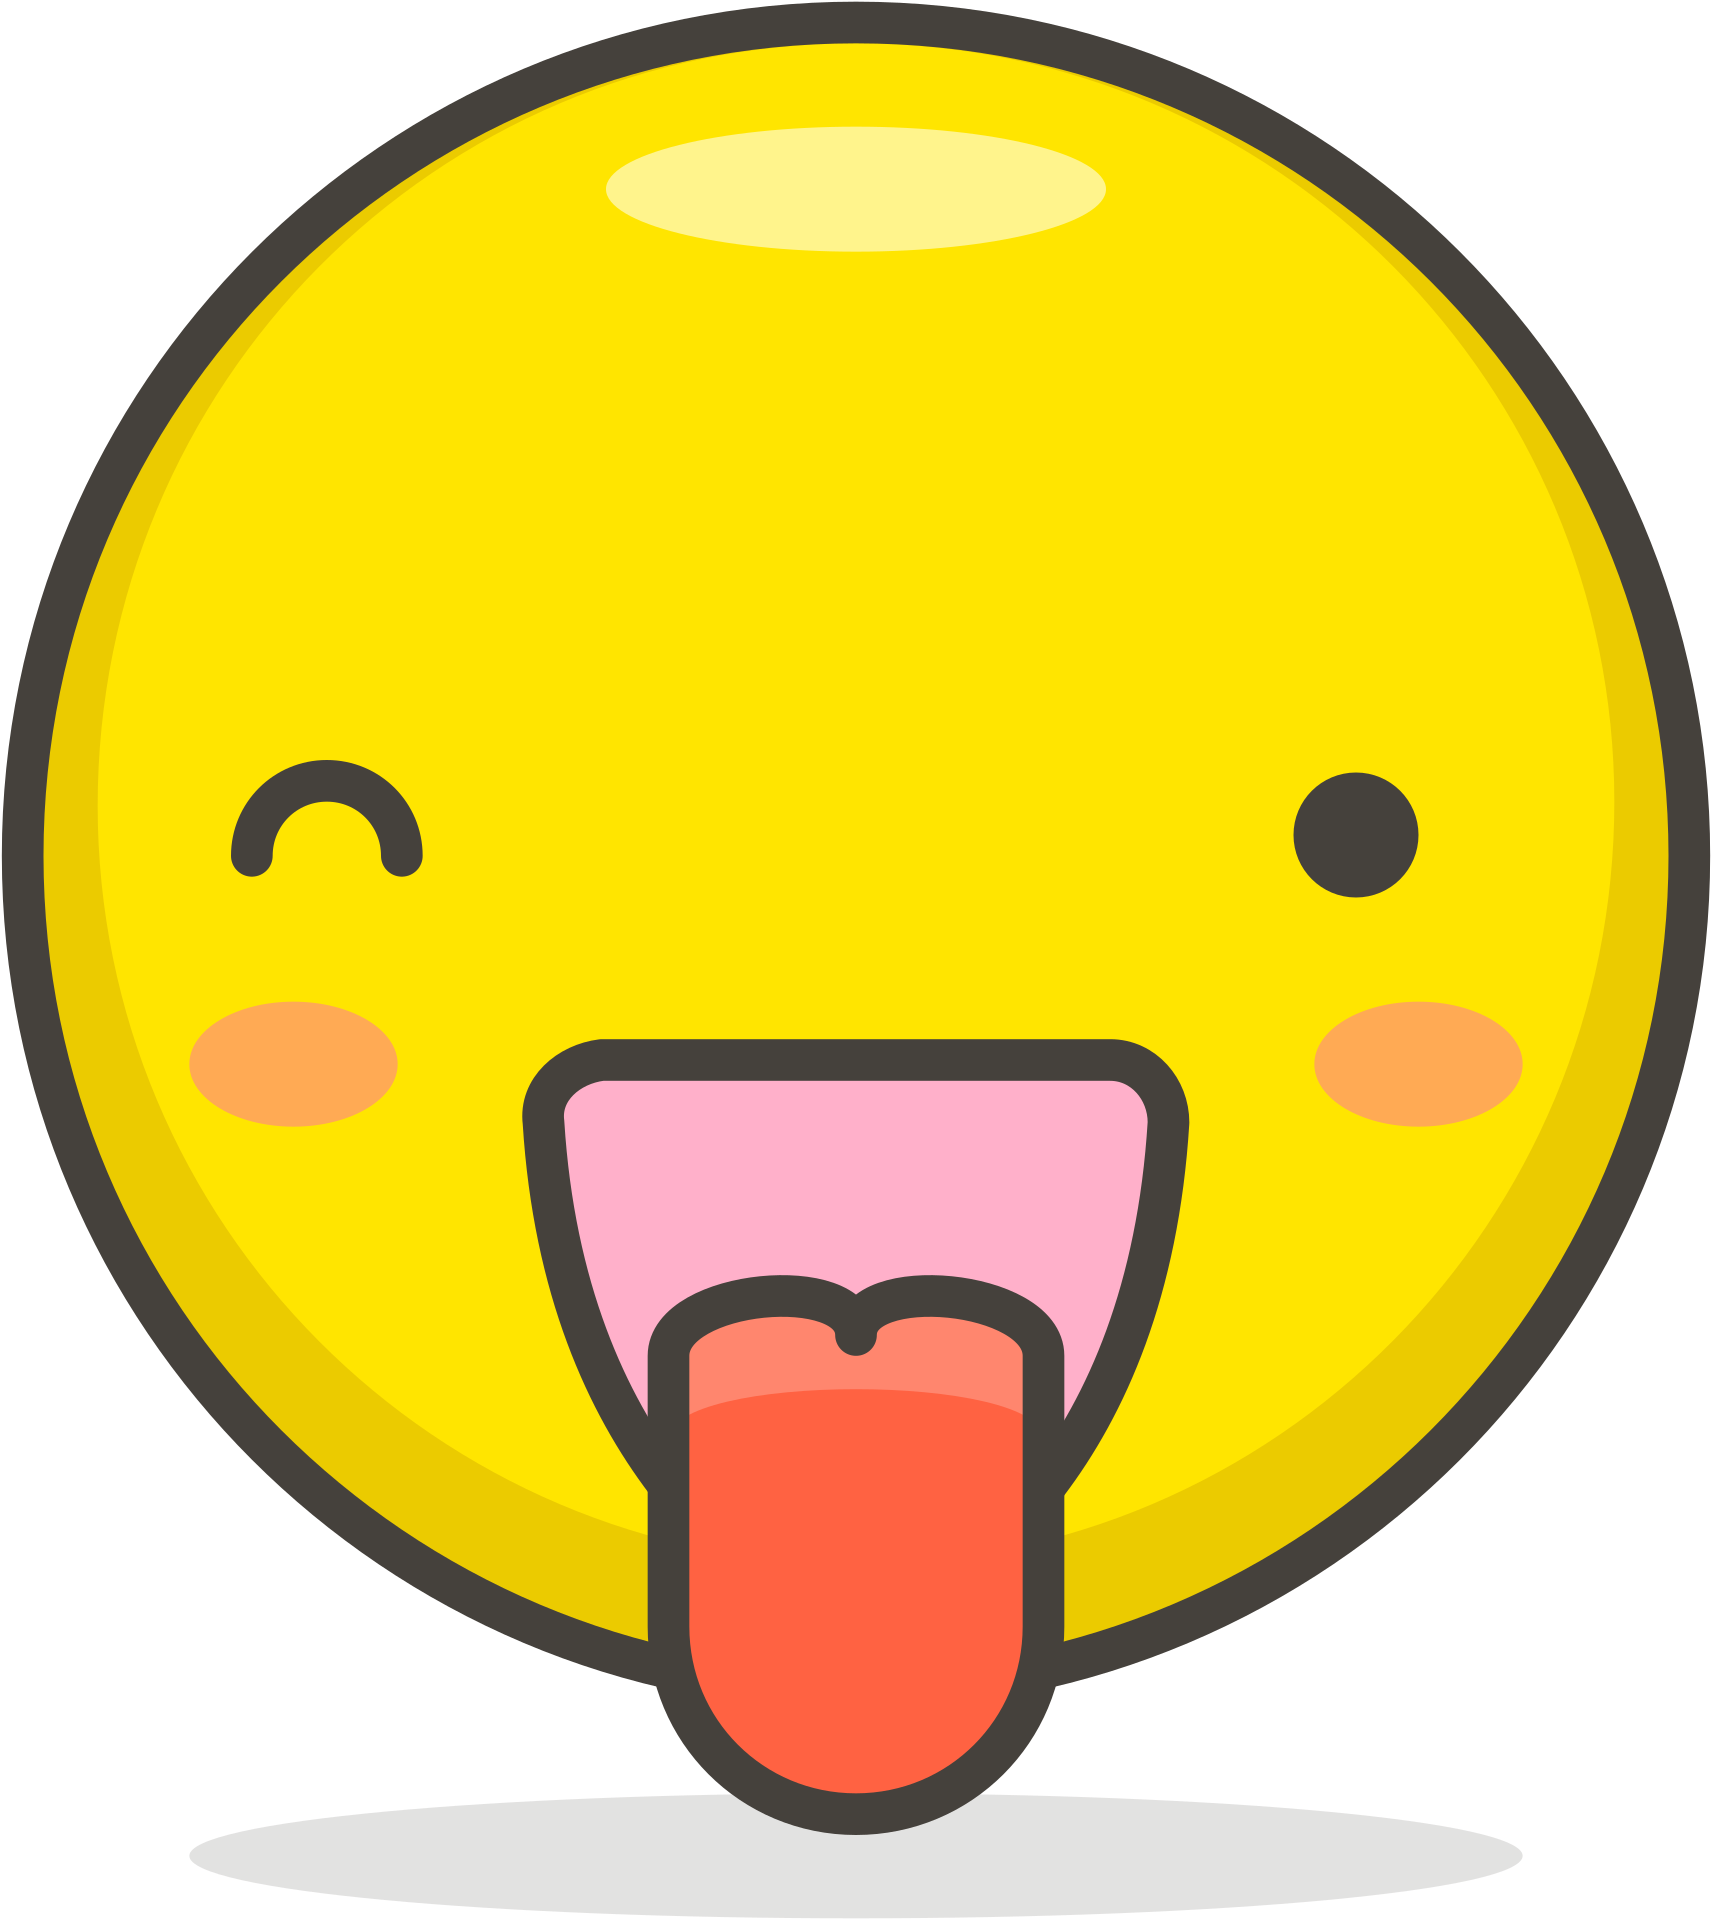 A Yellow Emoji With Tongue Sticking Out